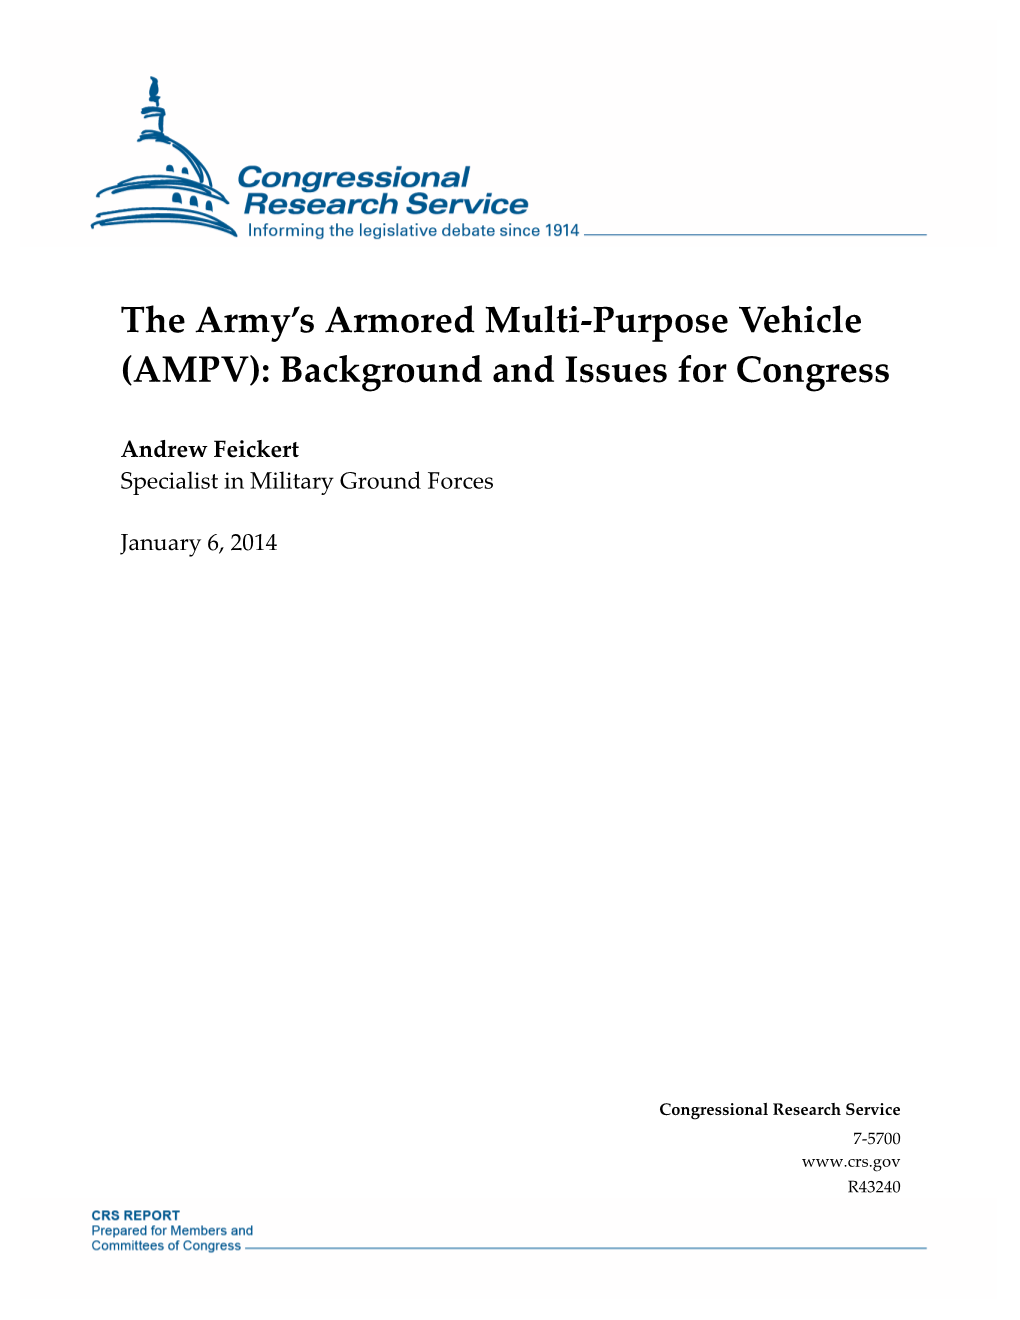 The Army's Armored Multi-Purpose Vehicle (AMPV)